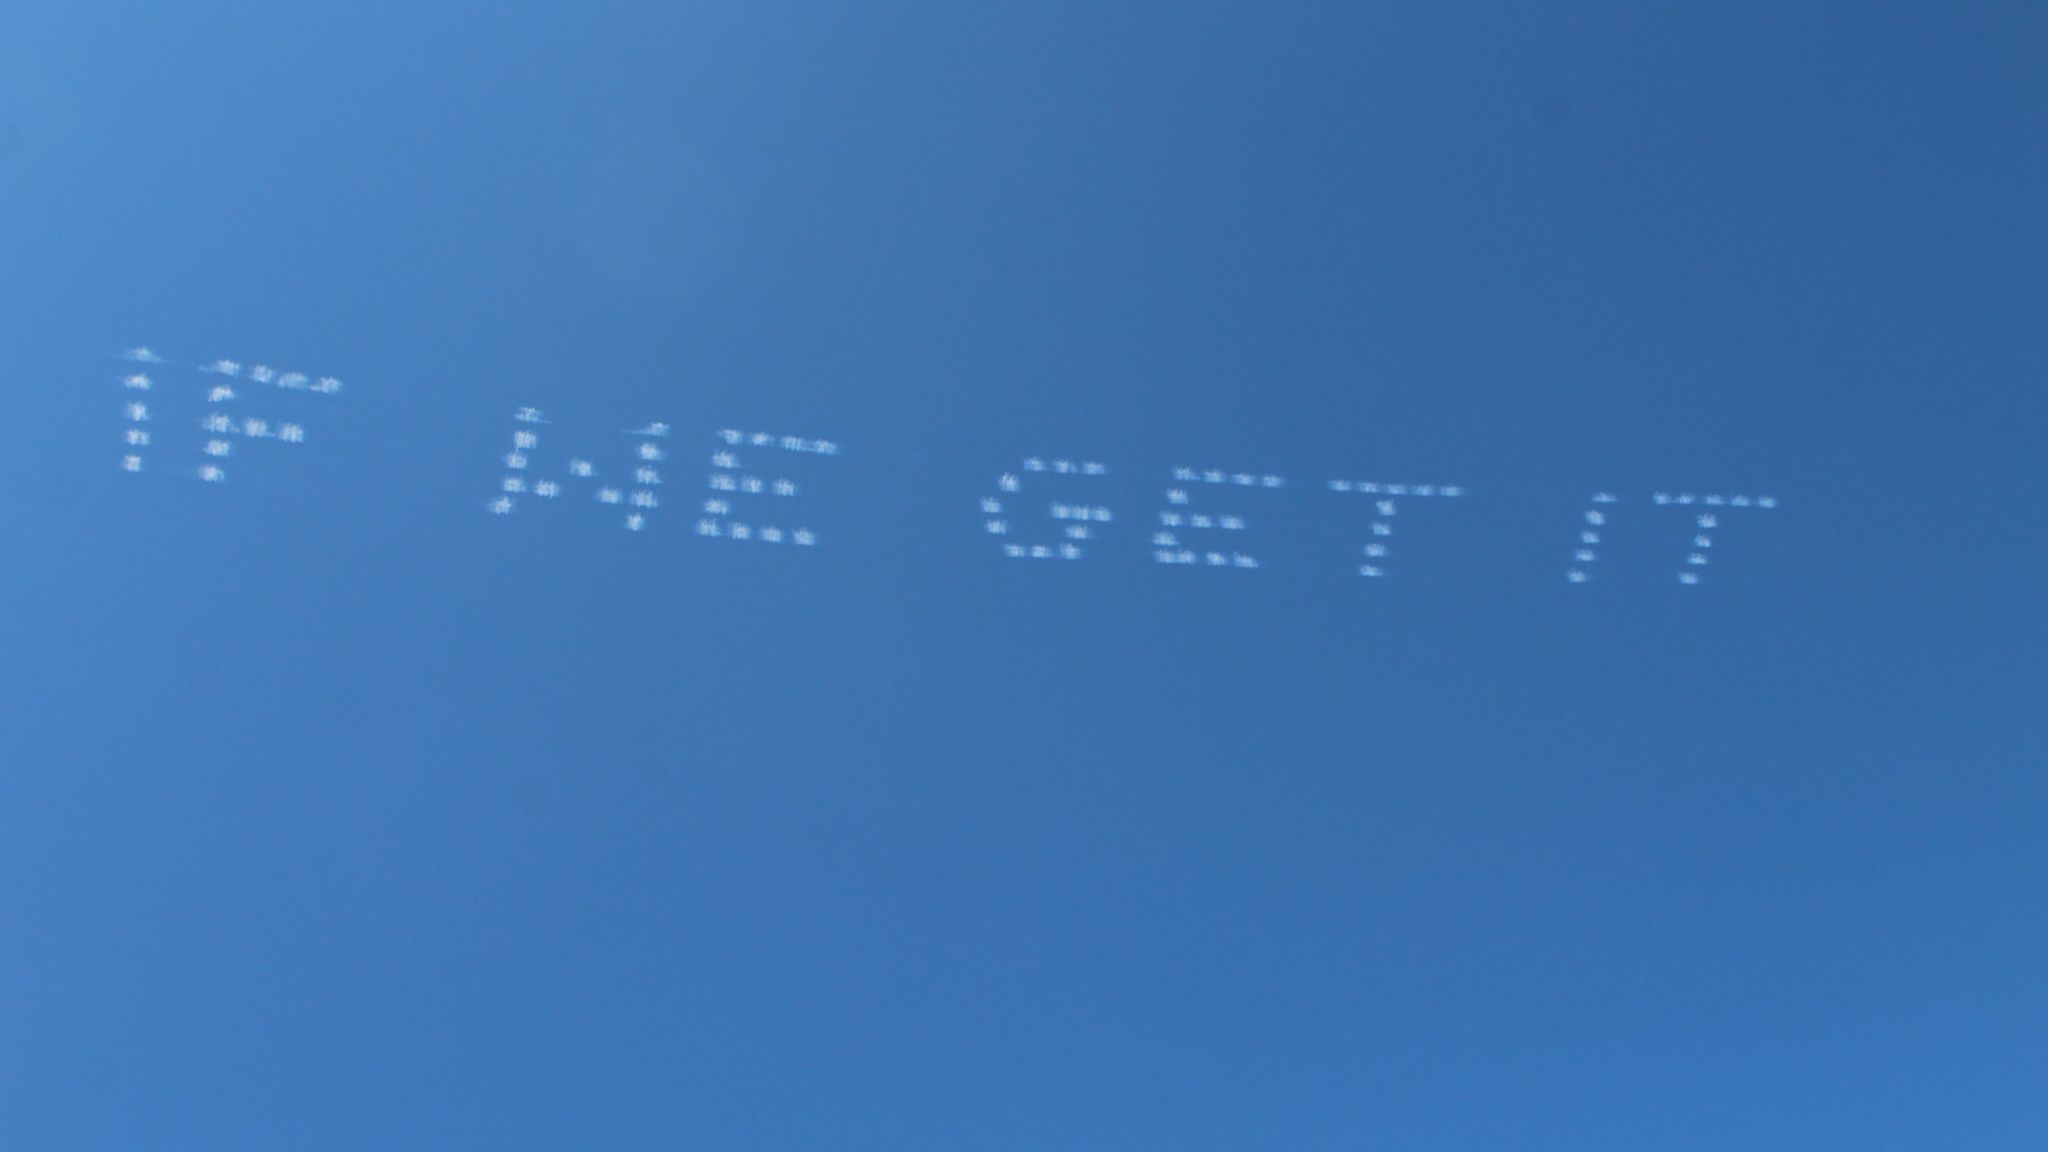 The first four words of the poem are puffed out by a Las Vegas-based skywriting crew called Skytypers.